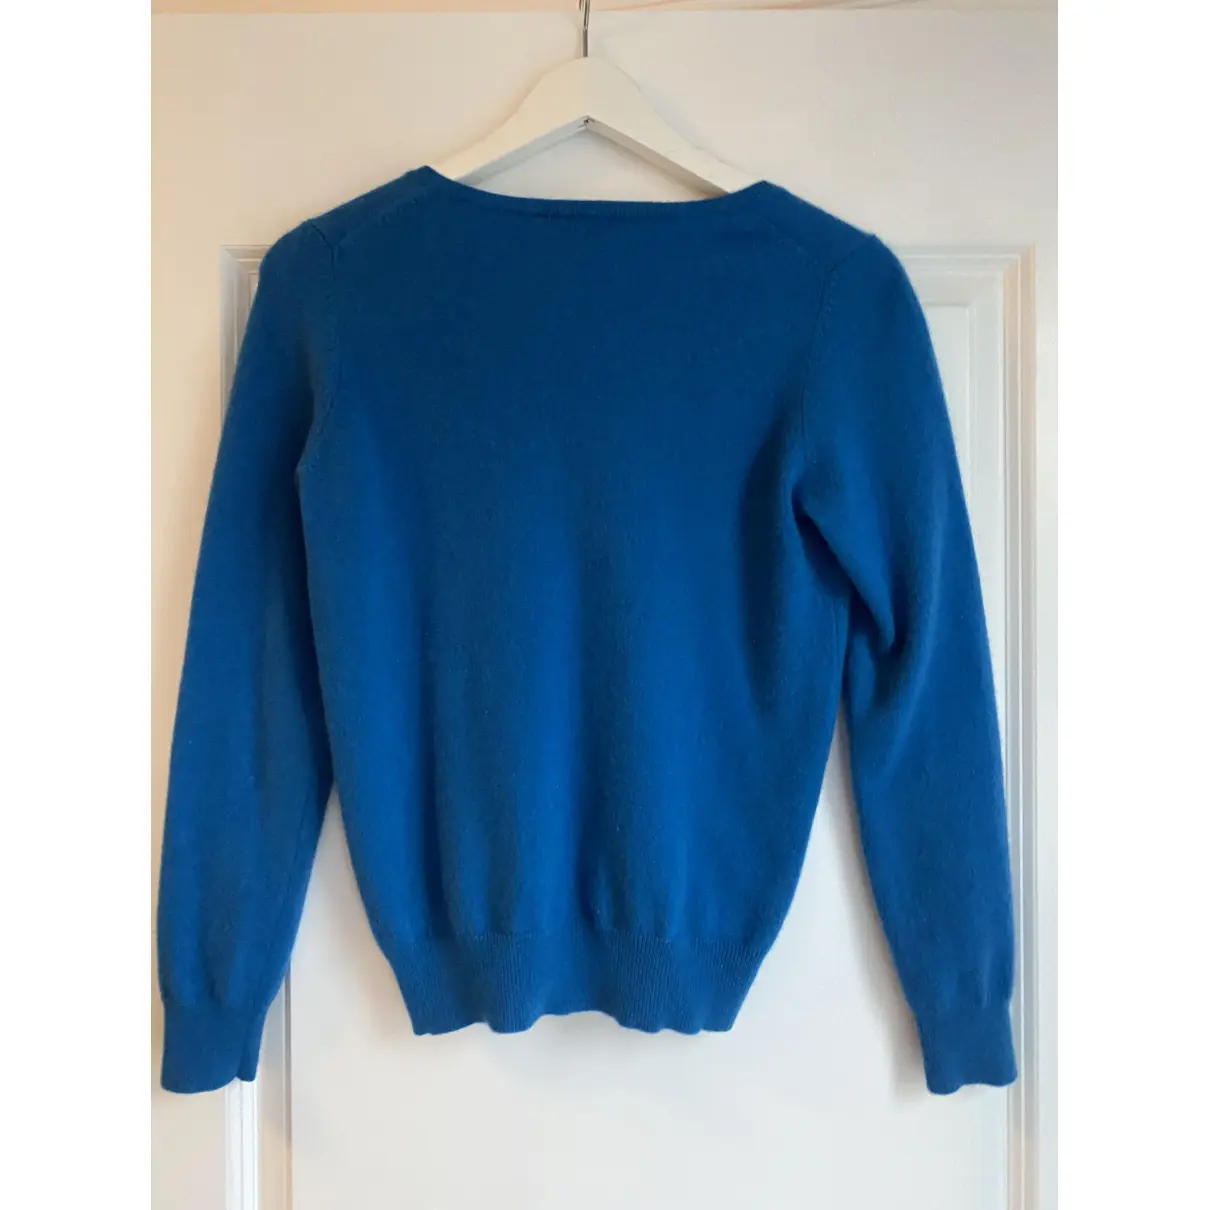 Buy Repeat Cashmere jumper online